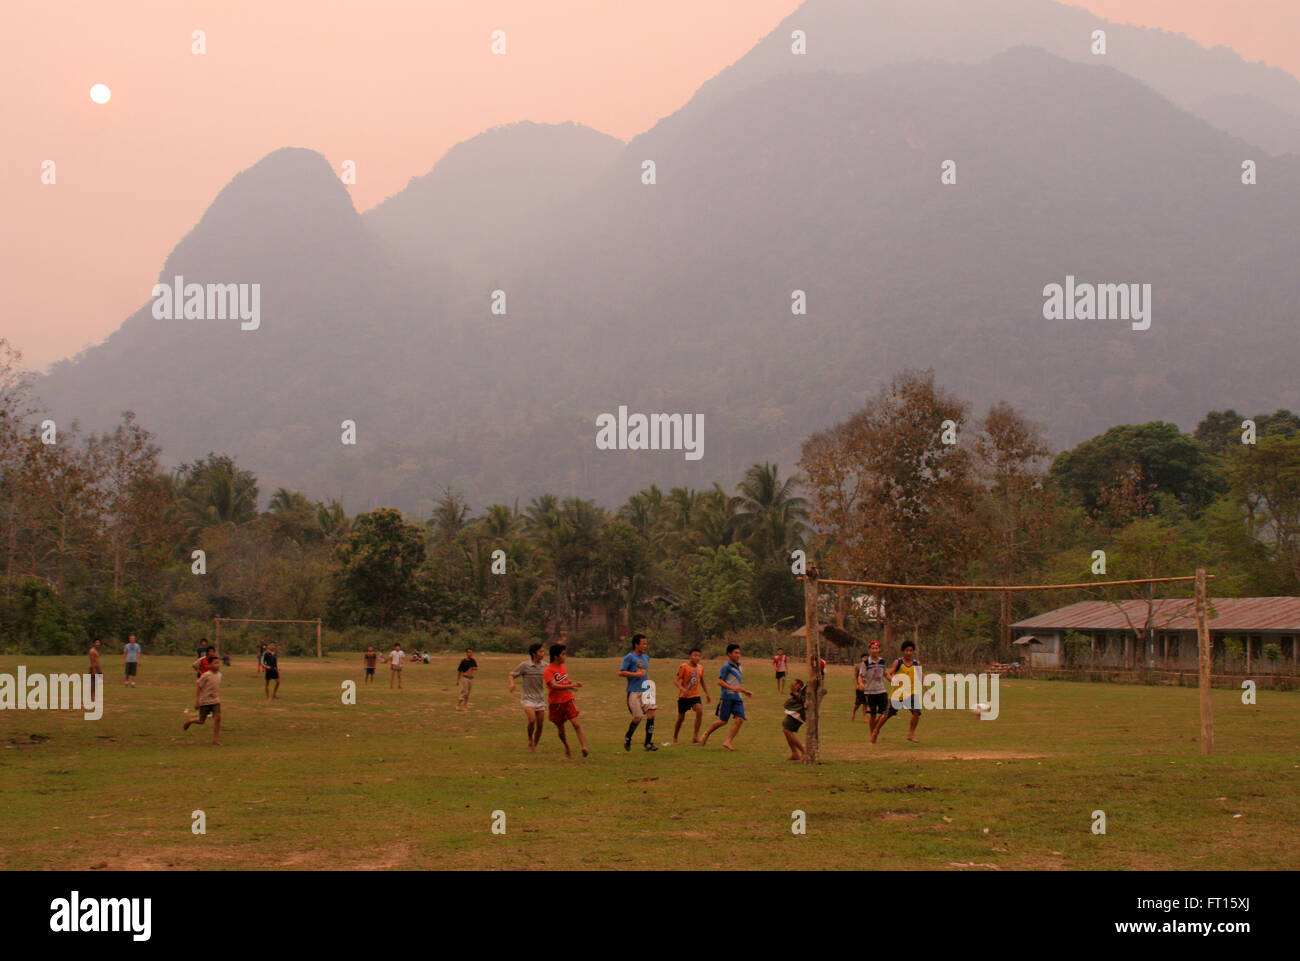 boys playing football, mountains in background Stock Photo